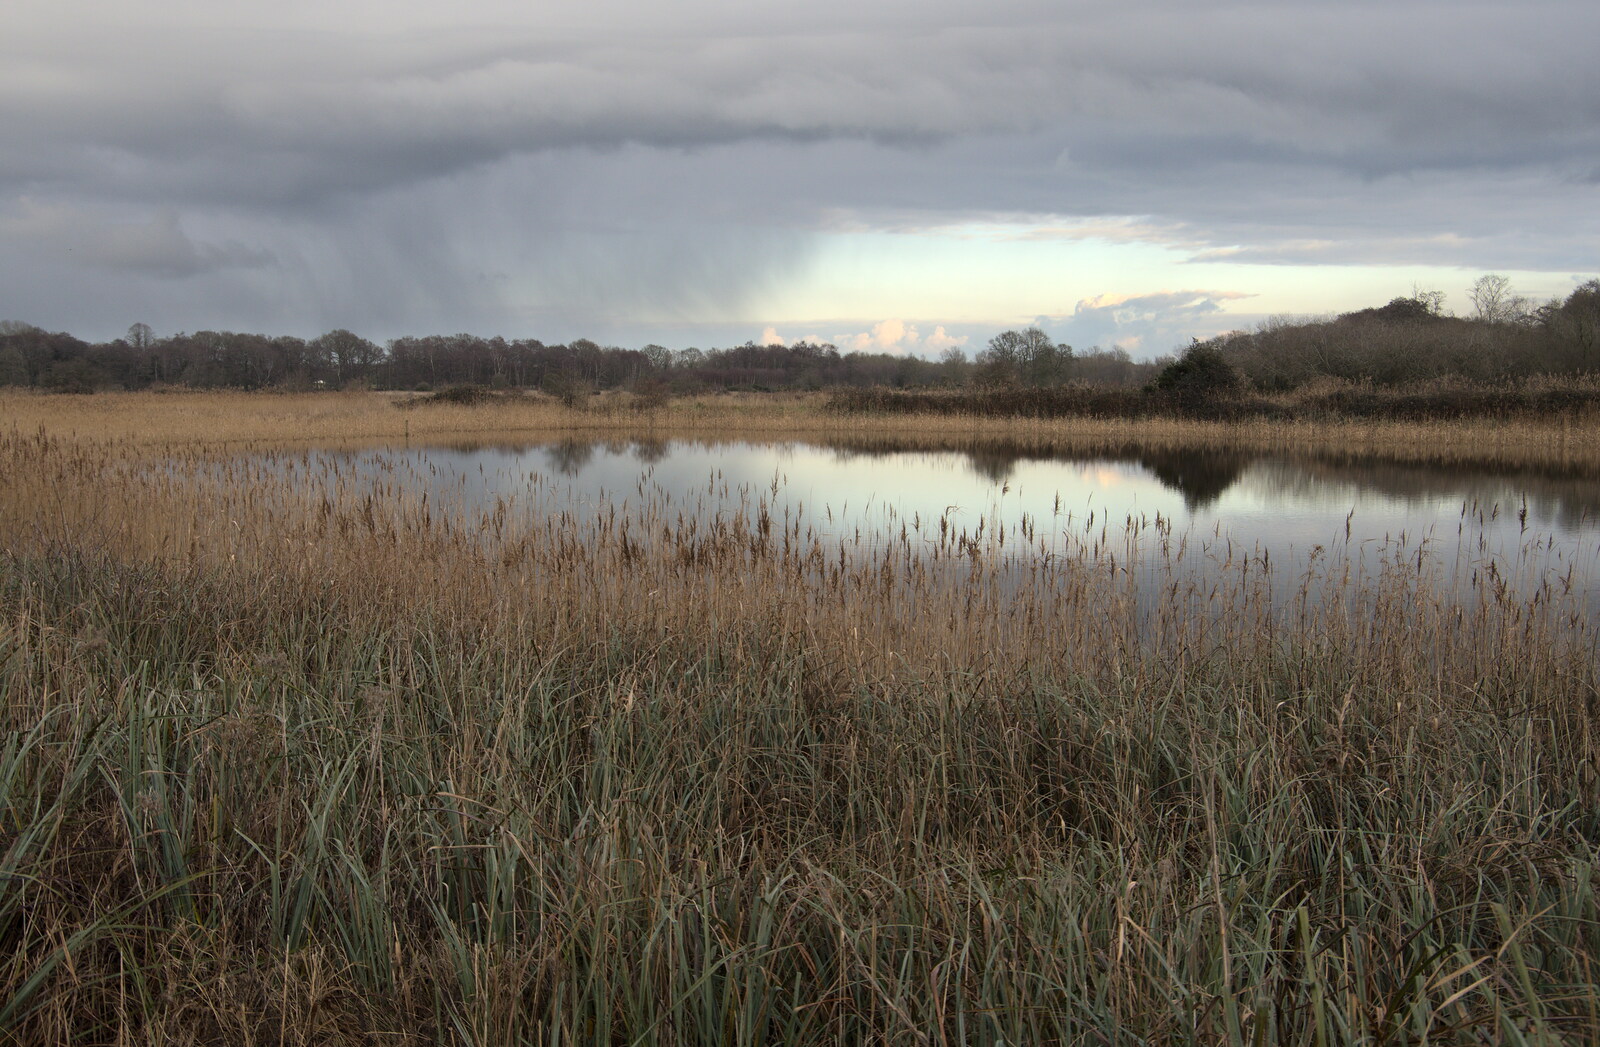 There's rain on the horizon over Redgrave Fen from A Walk Around Redgrave and Lopham Fen, Redgrave, Suffolk - 3rd January 2021